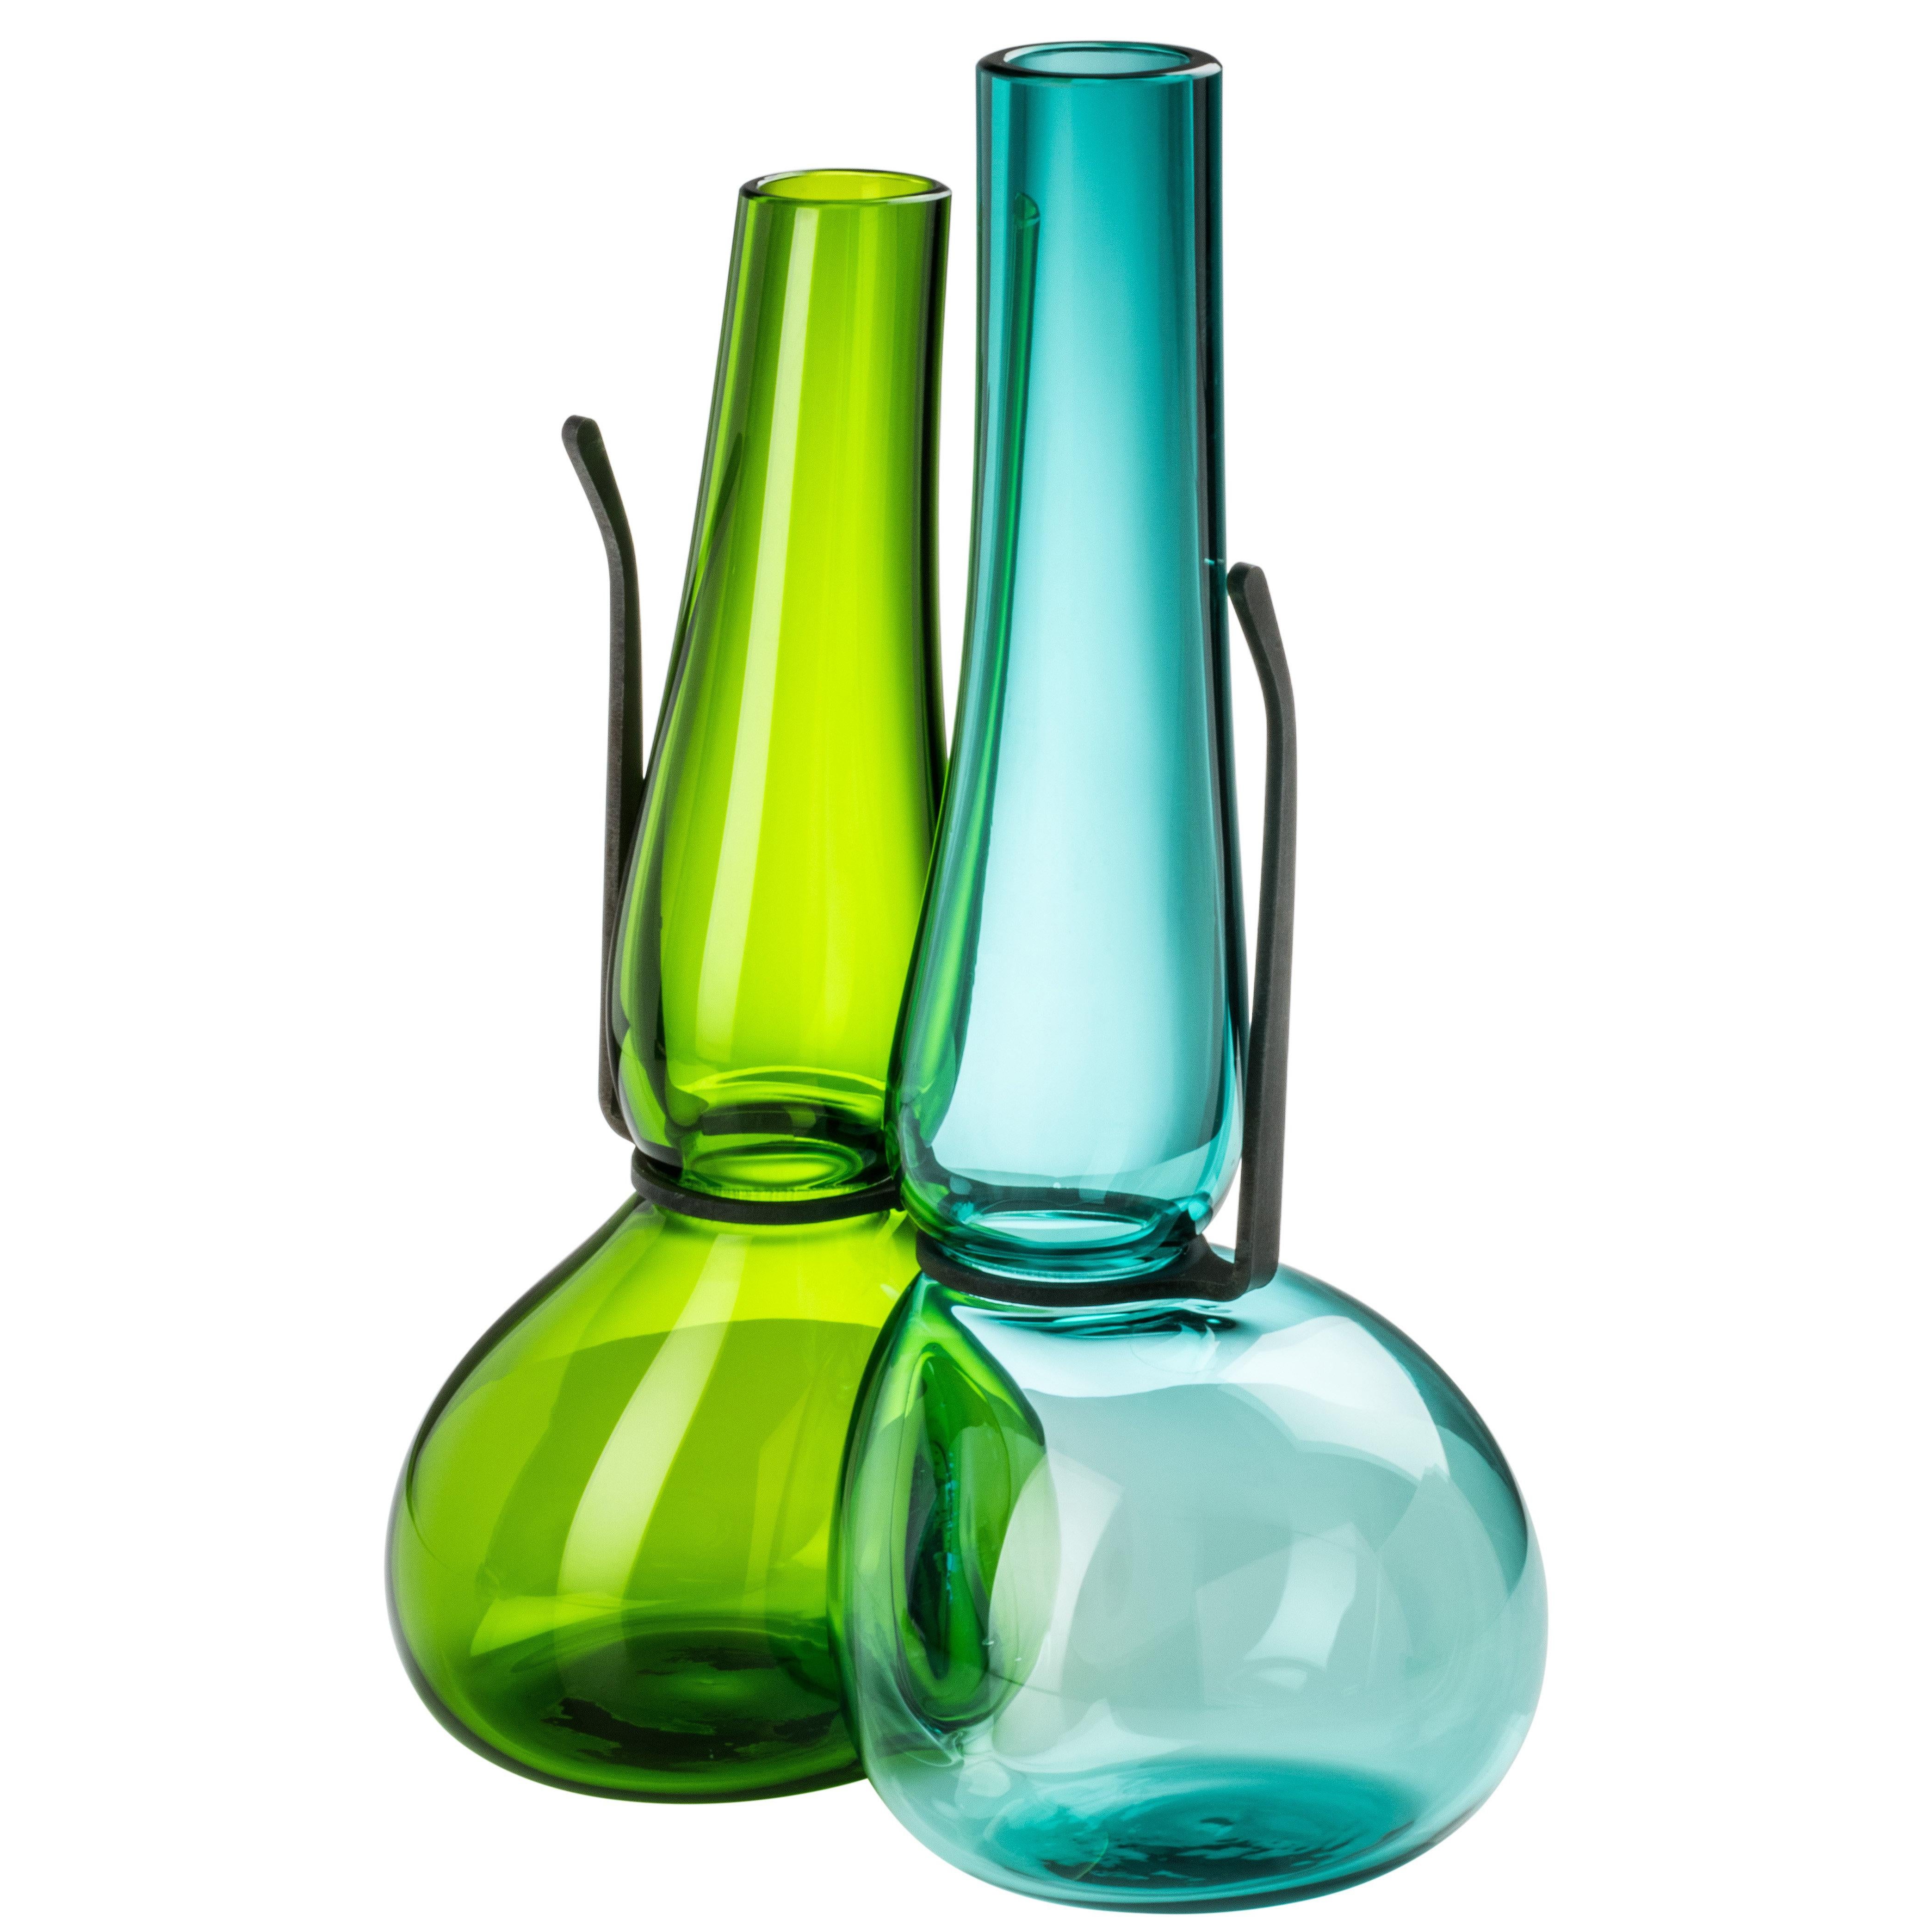 Venini 'Where Are My Glasses?' Double Lens Vase in Mint and Green by Ron Arad